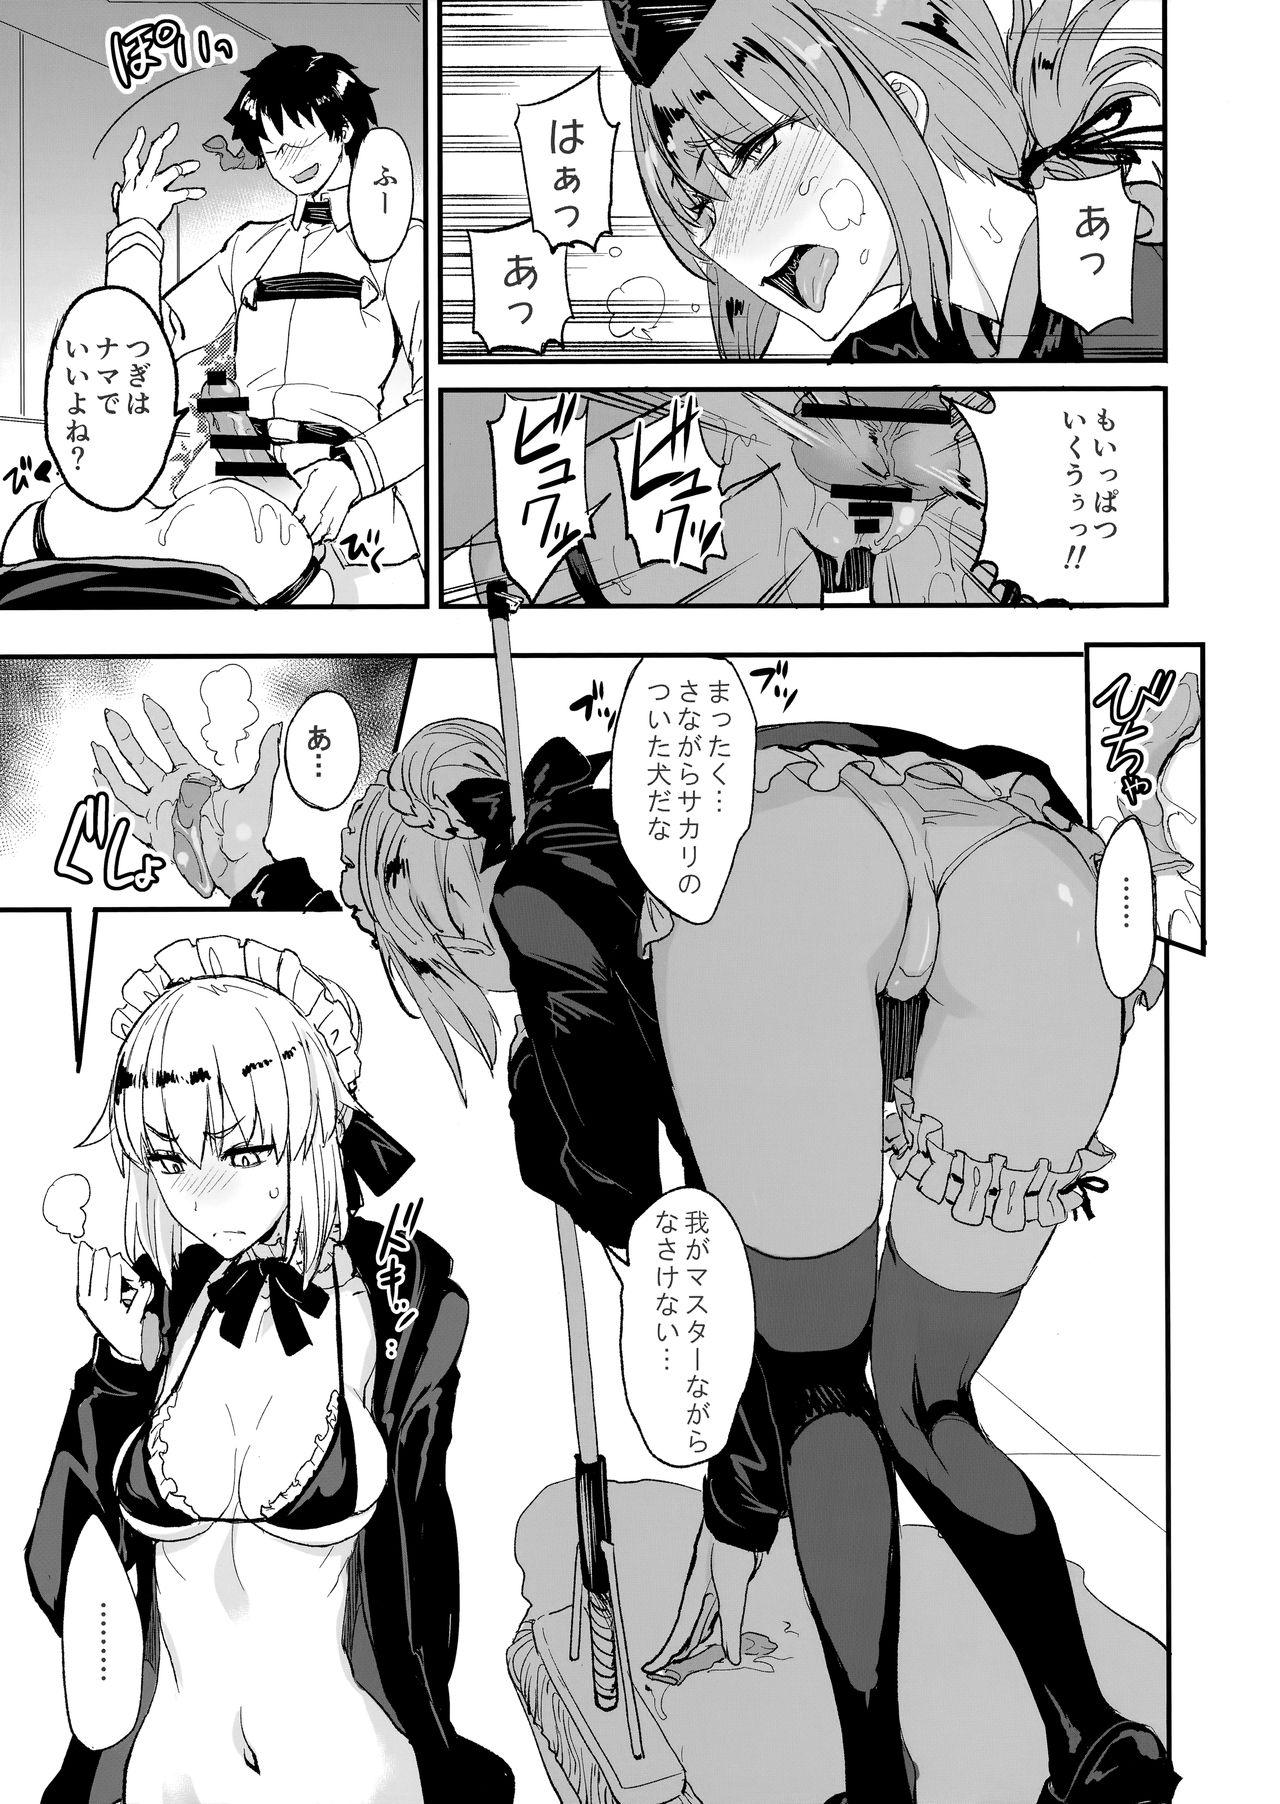 People Having Sex FGO no Erohon 2 - Fate grand order Best Blowjobs Ever - Page 8